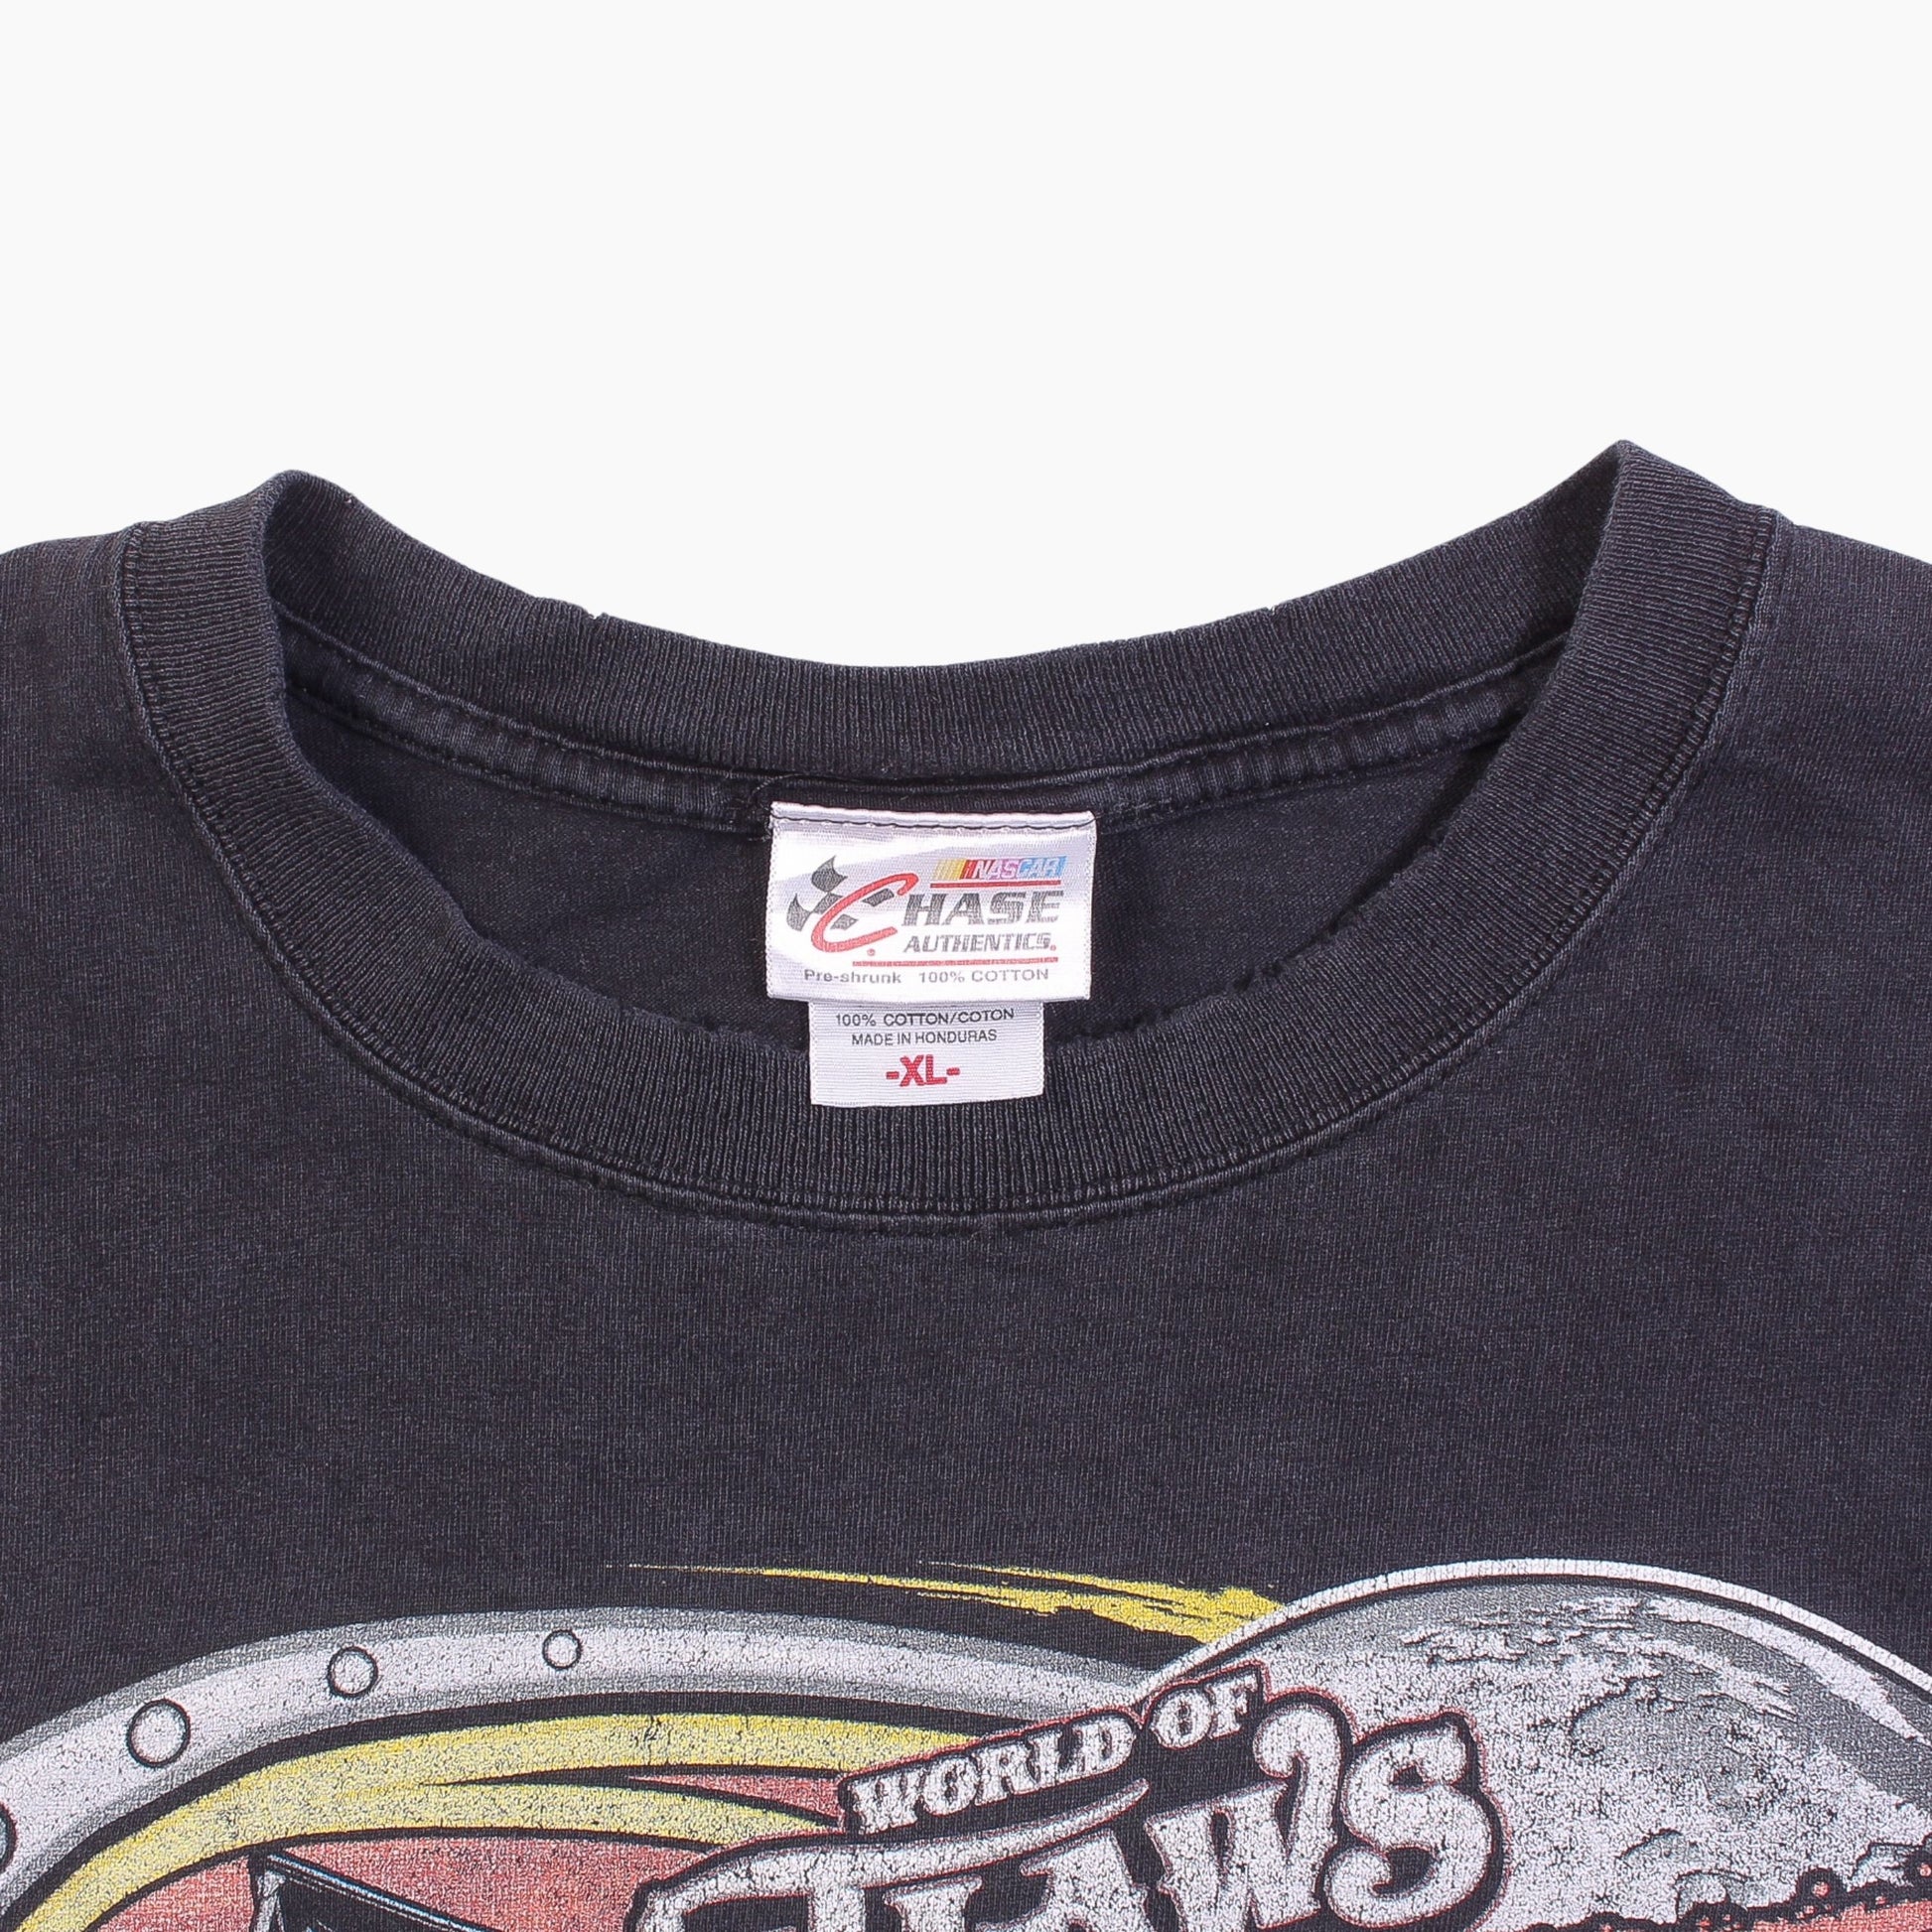 Vintage 'Outlaw's World Finals' T-Shirt - American Madness